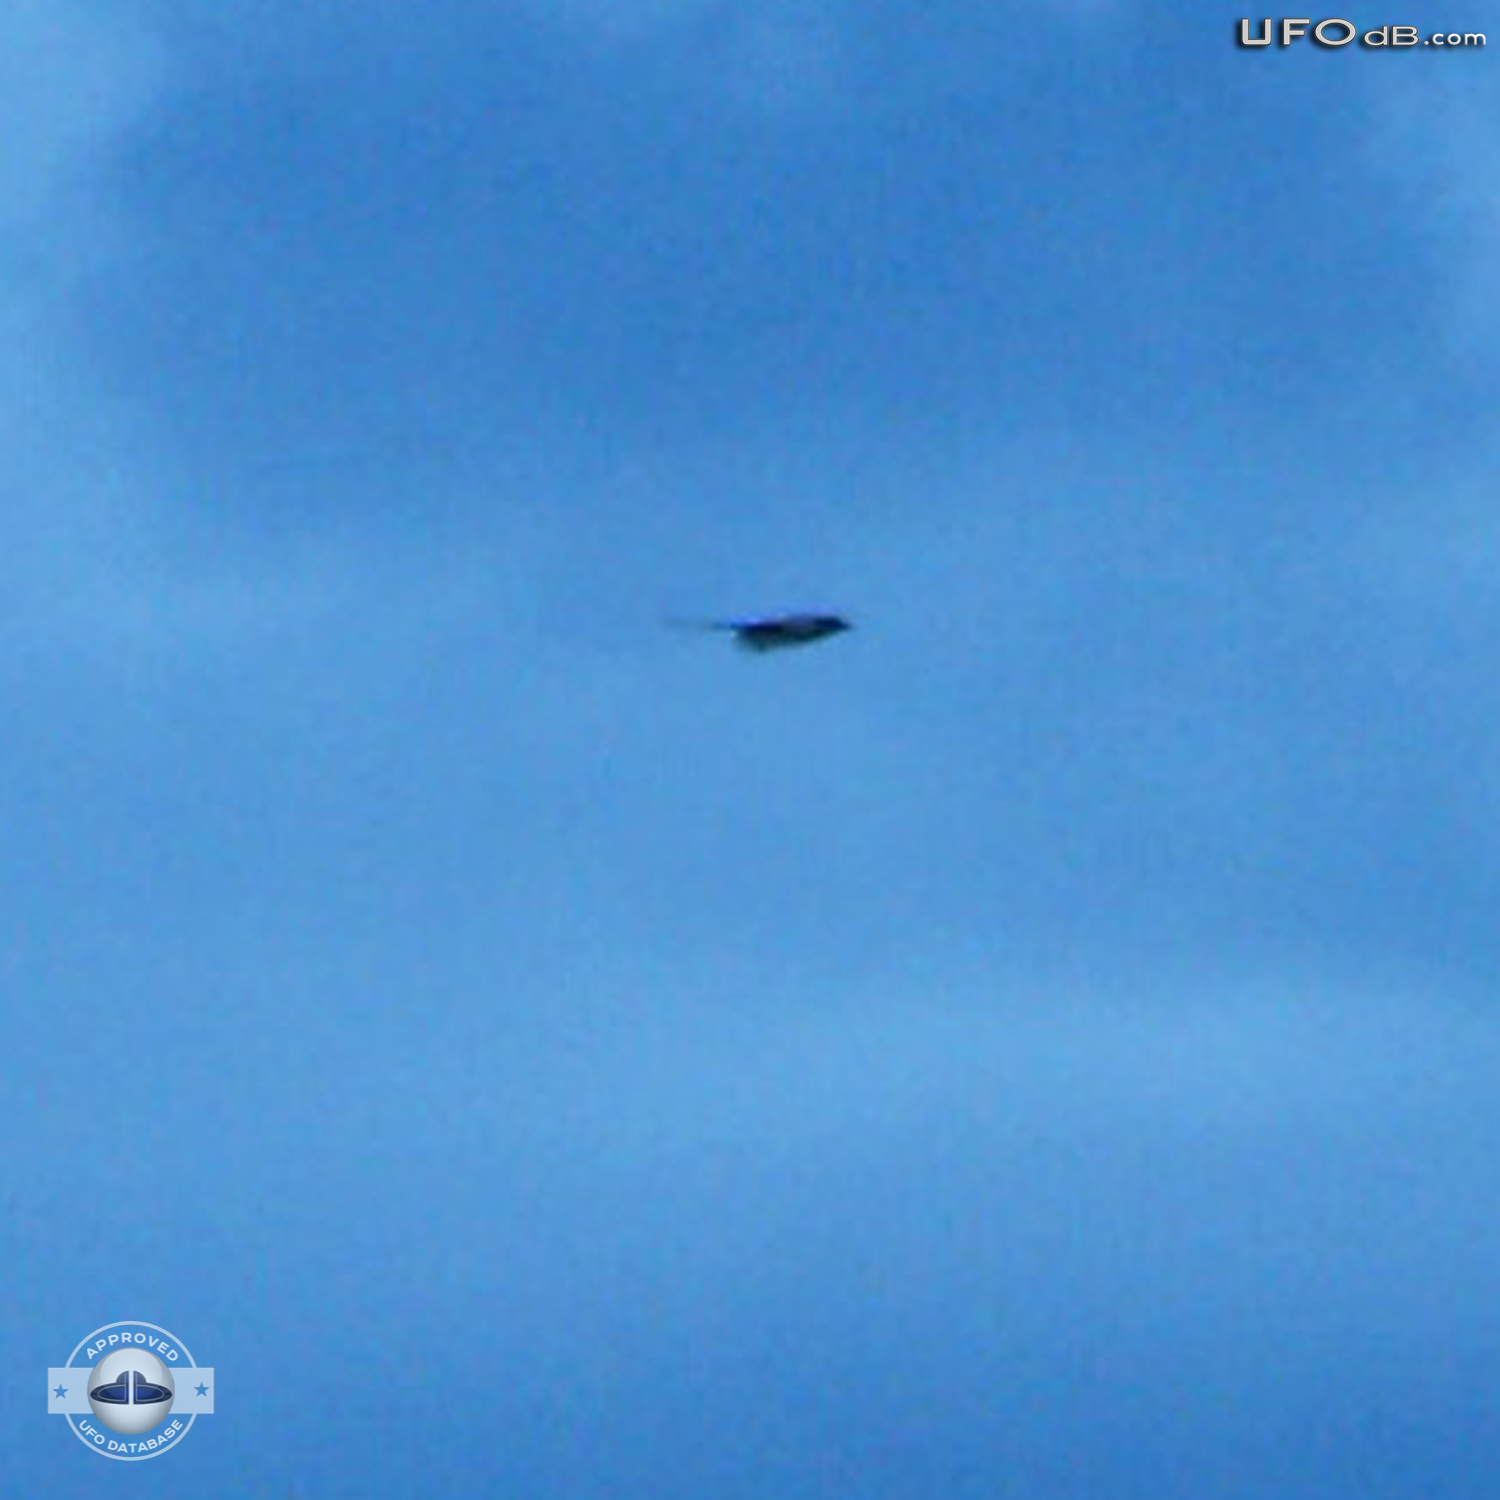 Panoramic picture capture a passing UFO in Colorado, USA | May 21 2011 UFO Picture #325-3